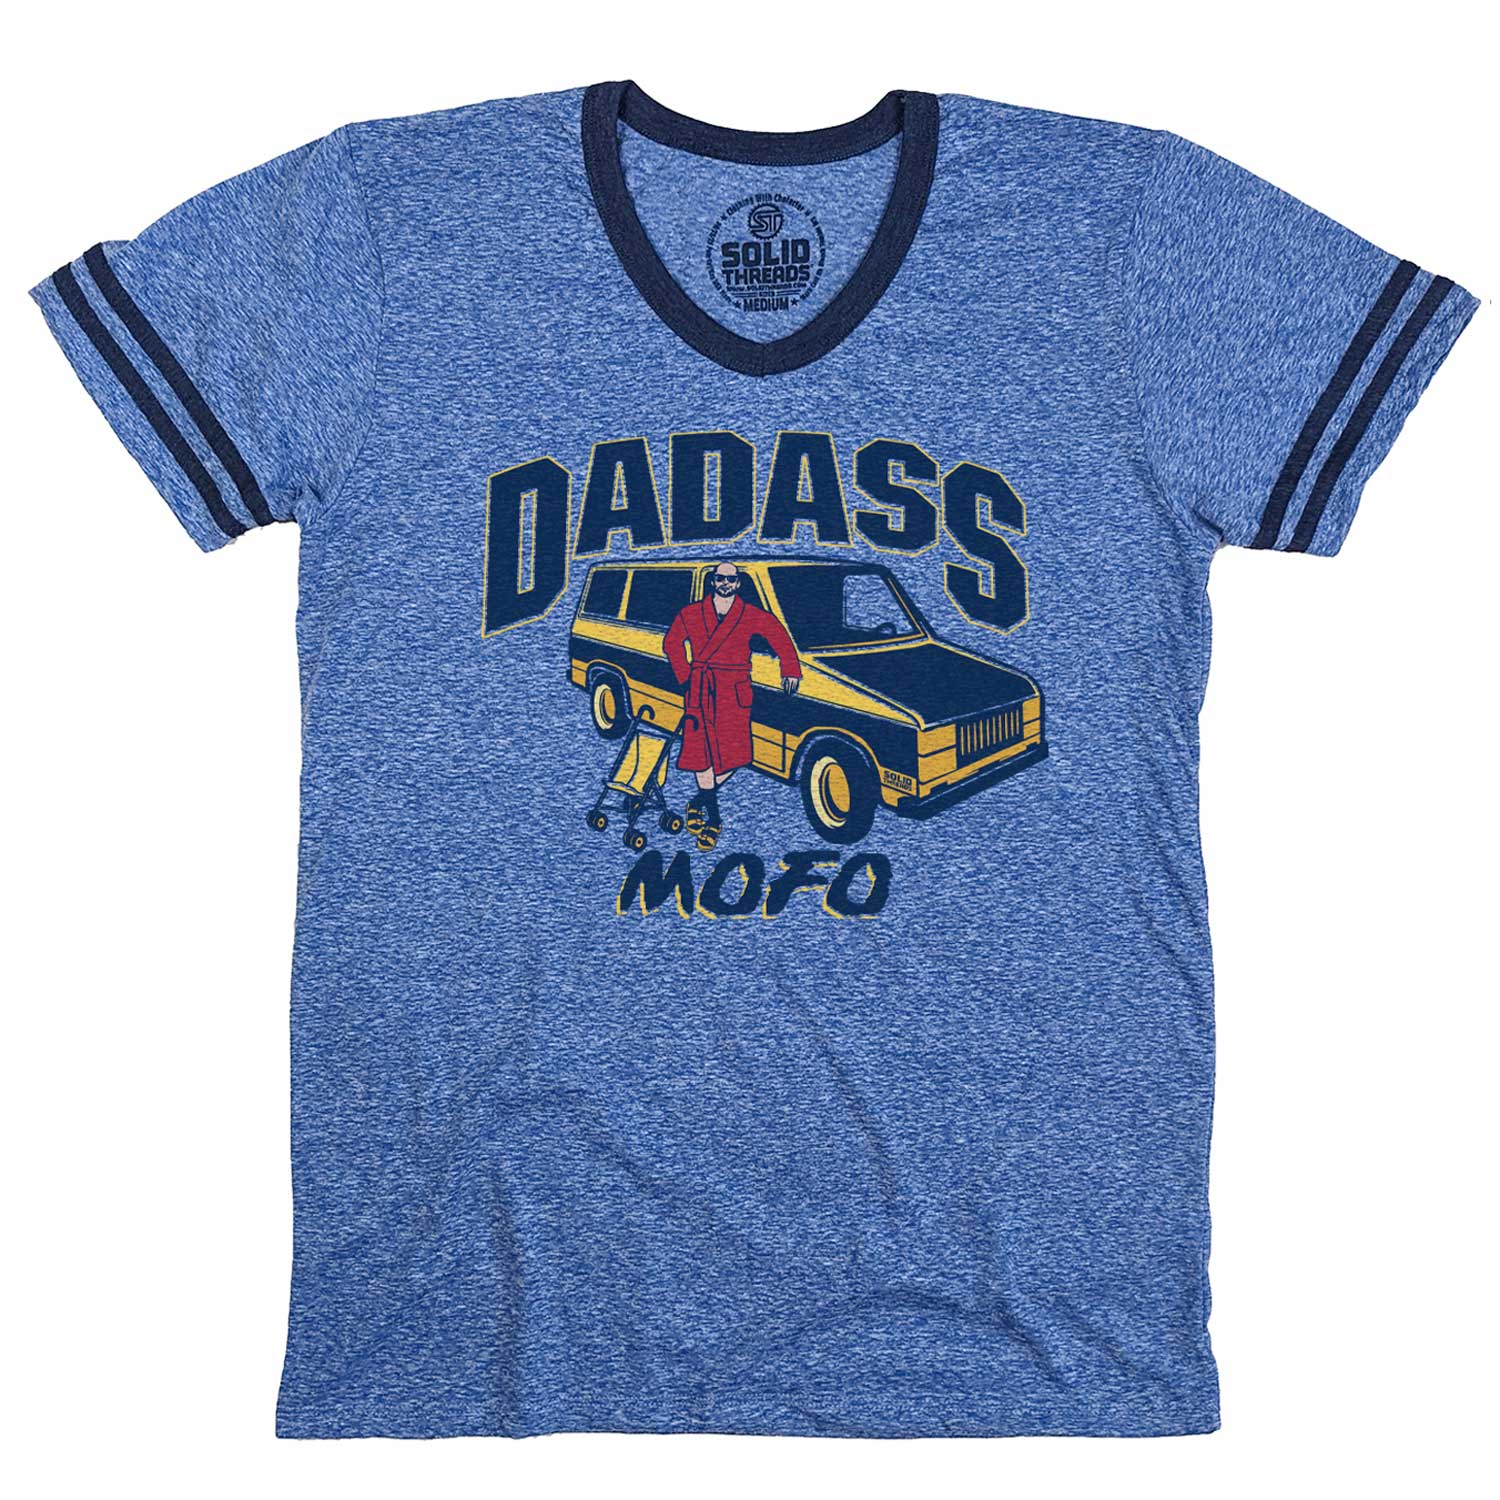 Men's Dadass Vintage Graphic V-Neck Tee | Funny Dad T-shirt | Solid Threads